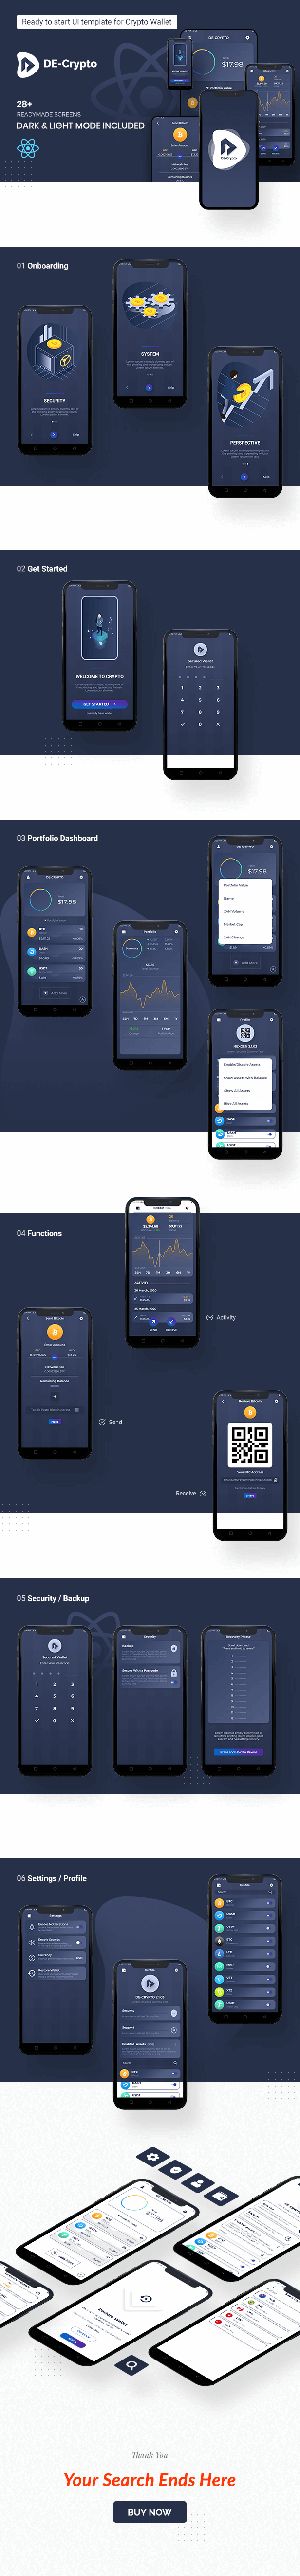 decentralized cryptocurrency react native mobile app template